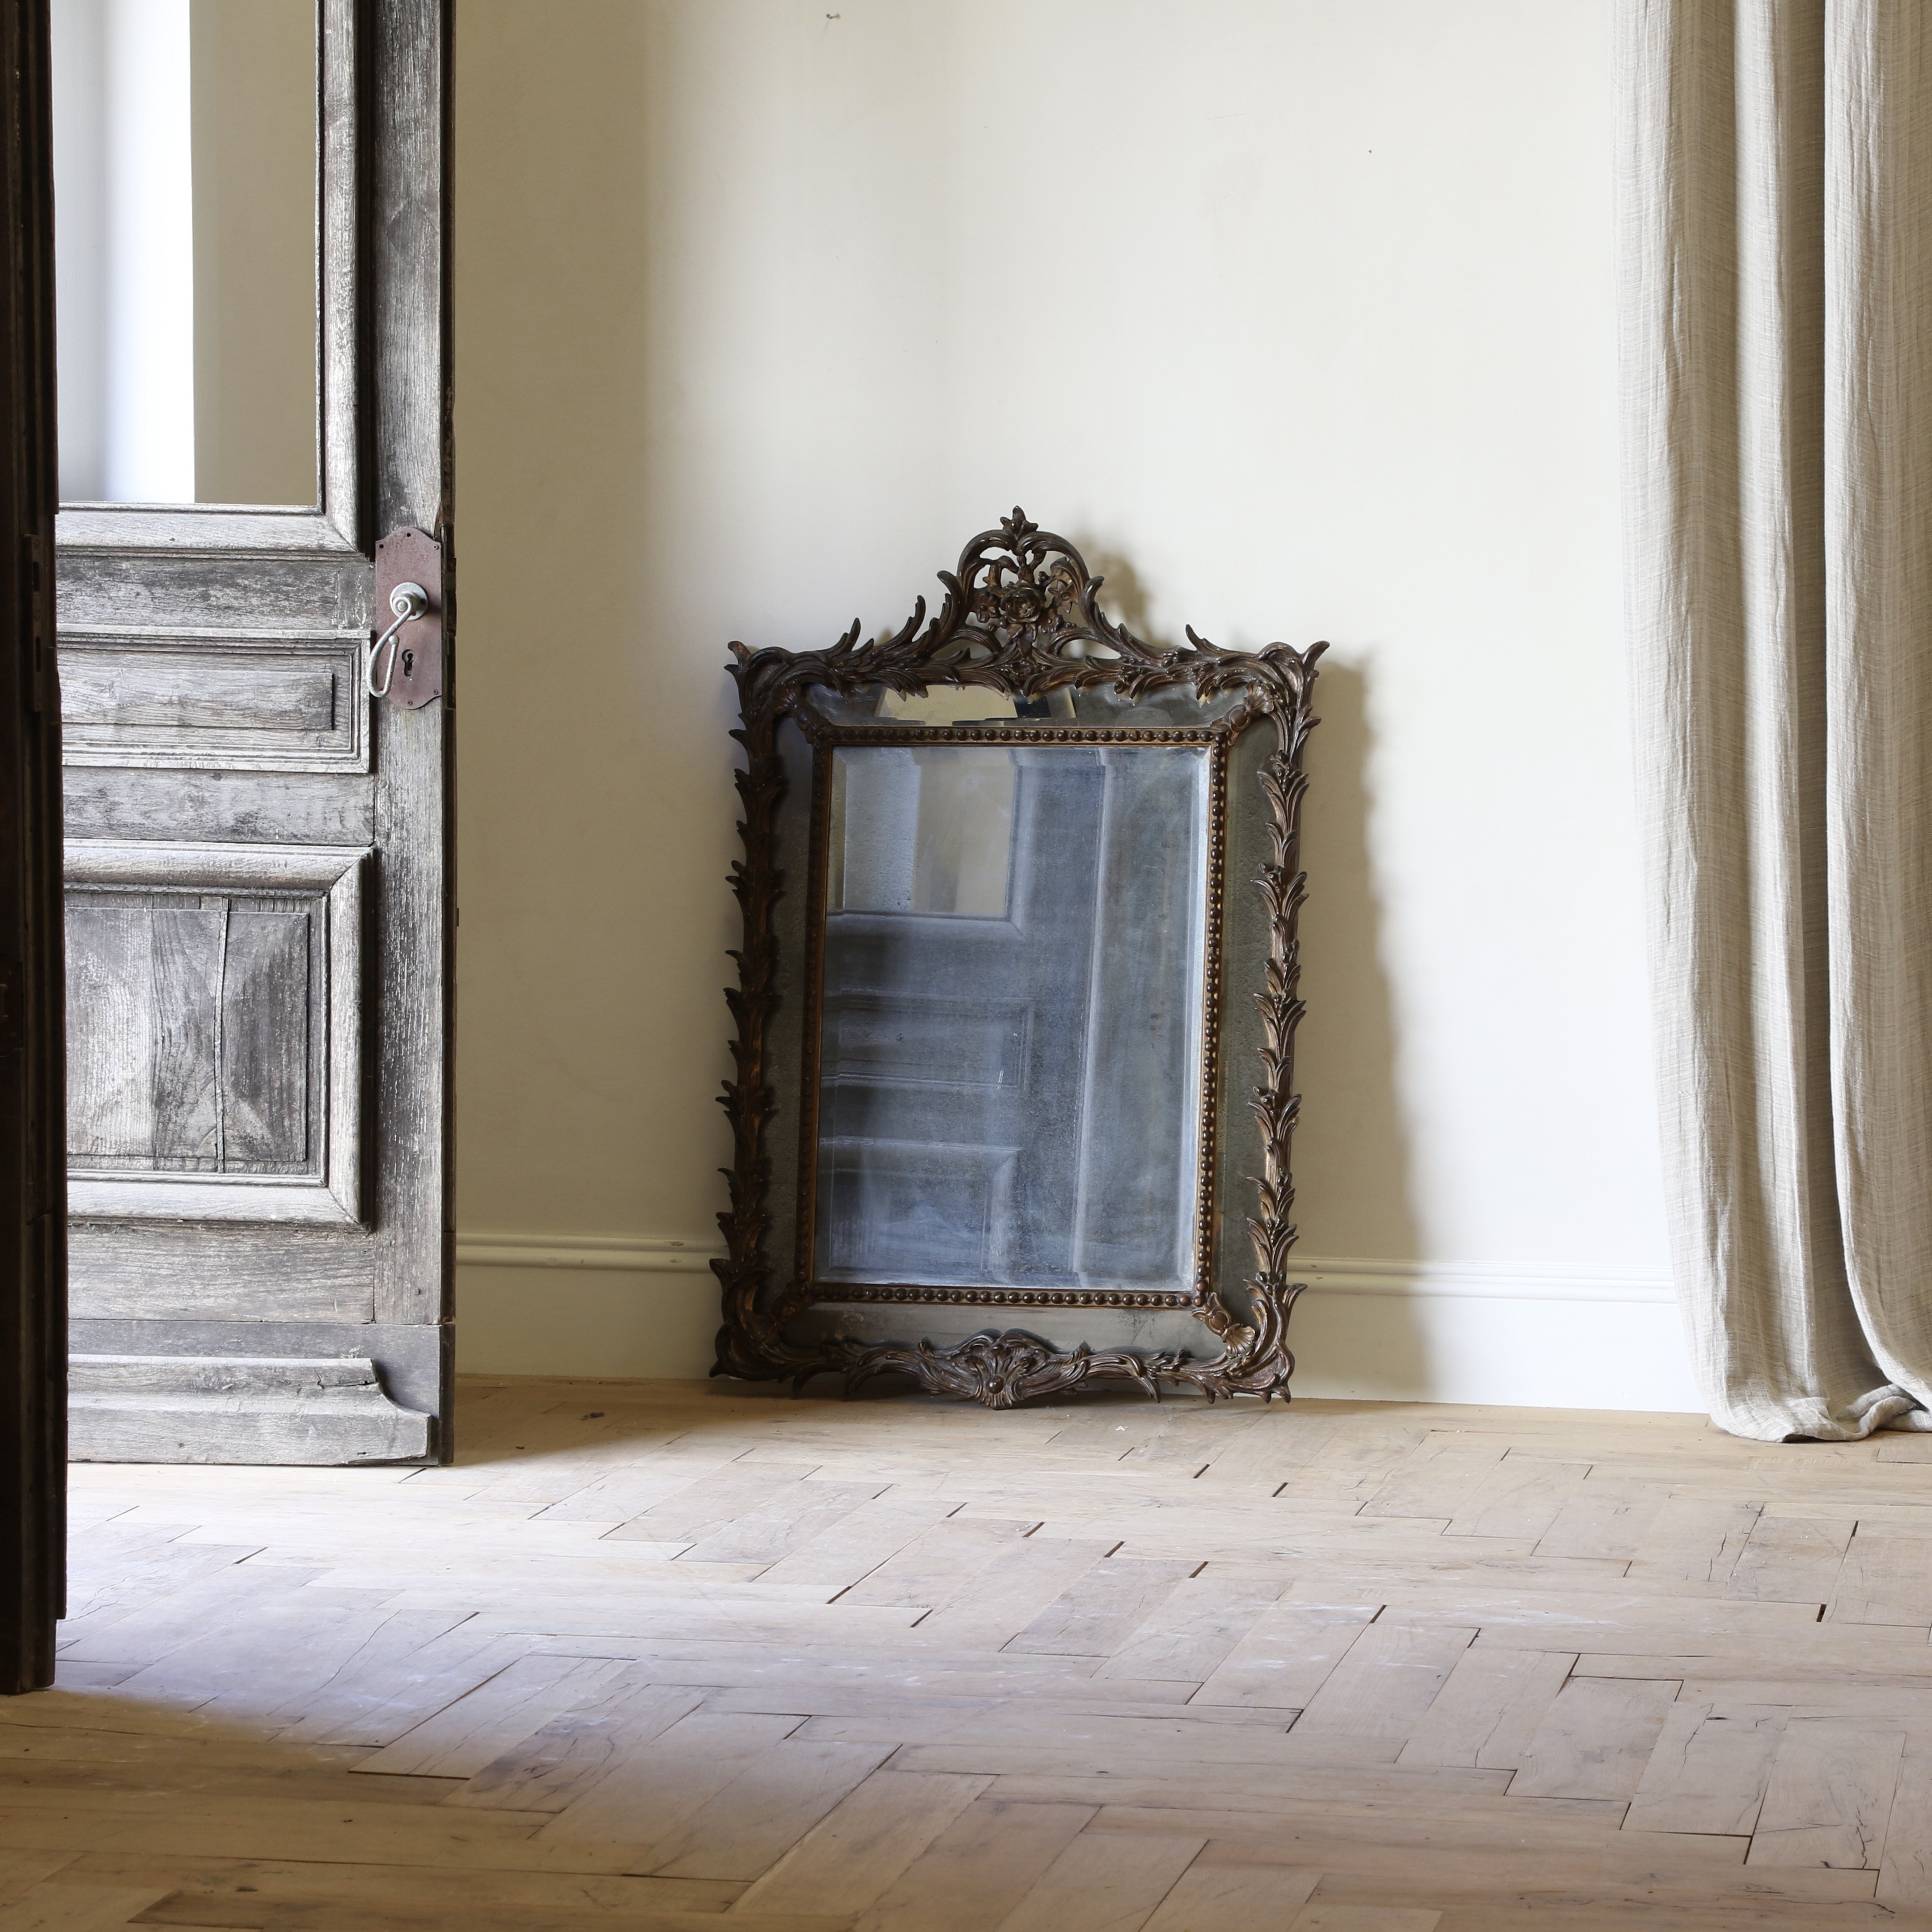 A Stunning French 18th Century Rococo Mirror